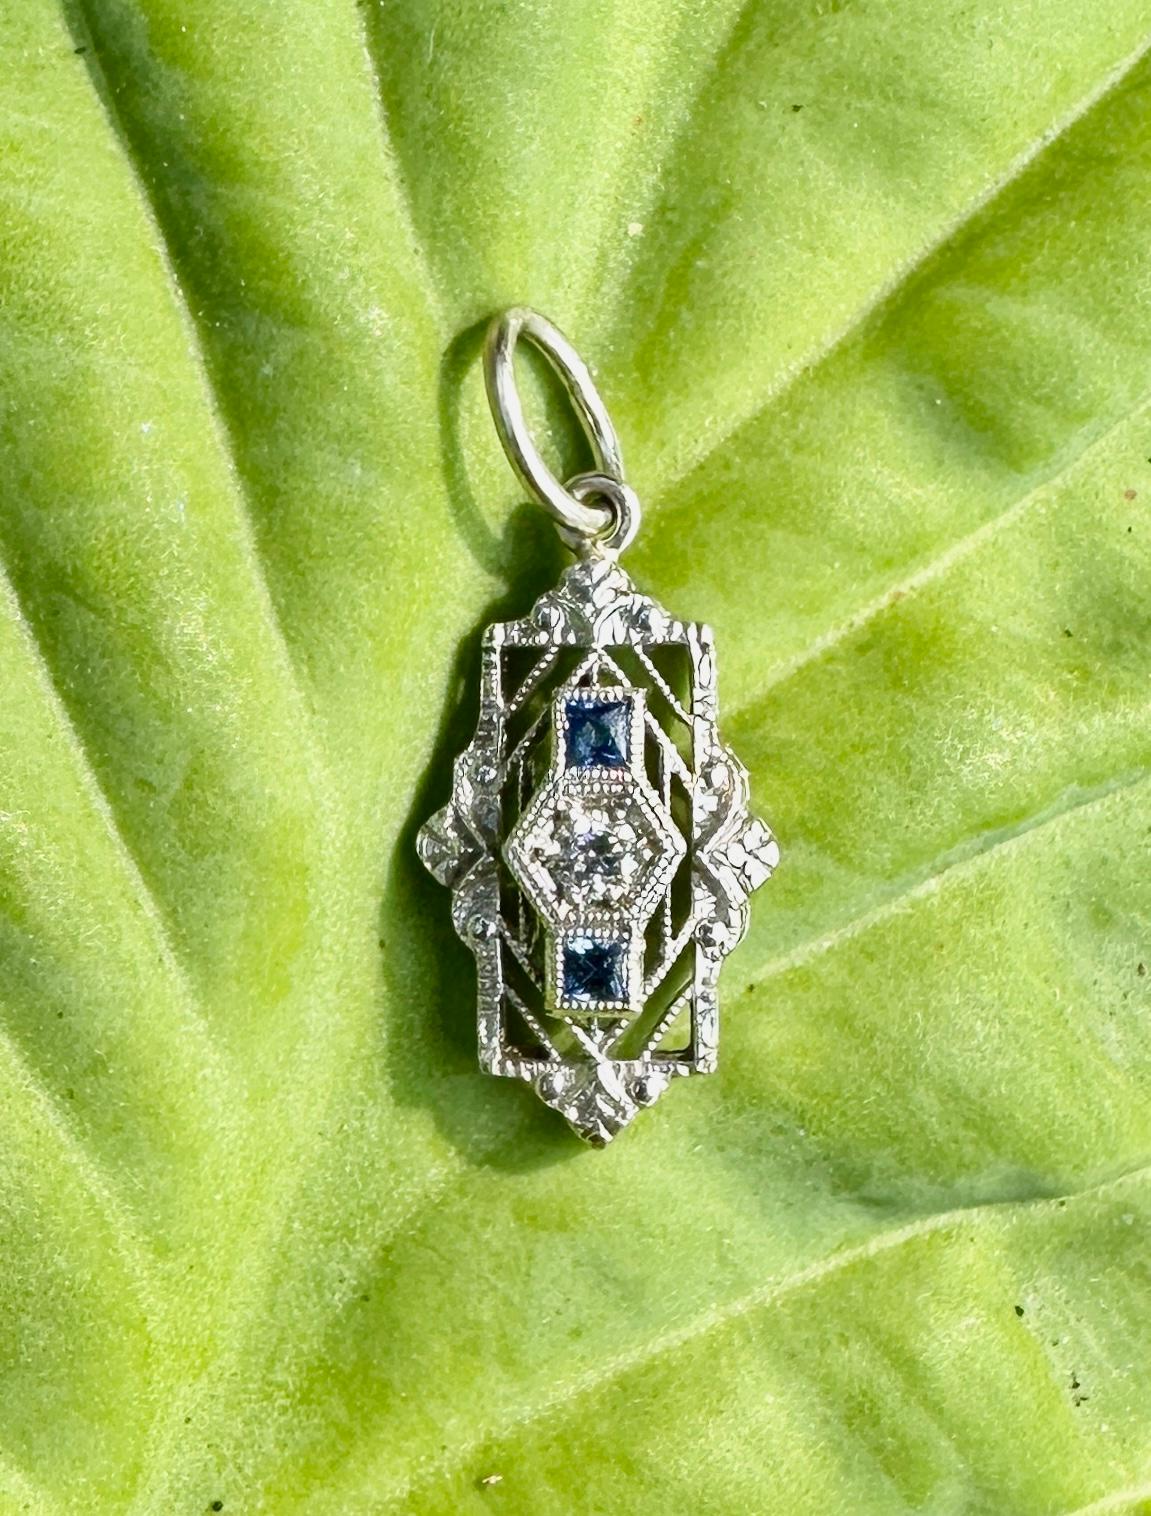 This is a very special antique Art Deco pendant with a sparkling Old Mine Cut Diamond and two square cut Sapphire gems in an exquisite delicate refined filigree design in 14 Karat White Gold.  This is one of the most beautiful Art Deco filigree